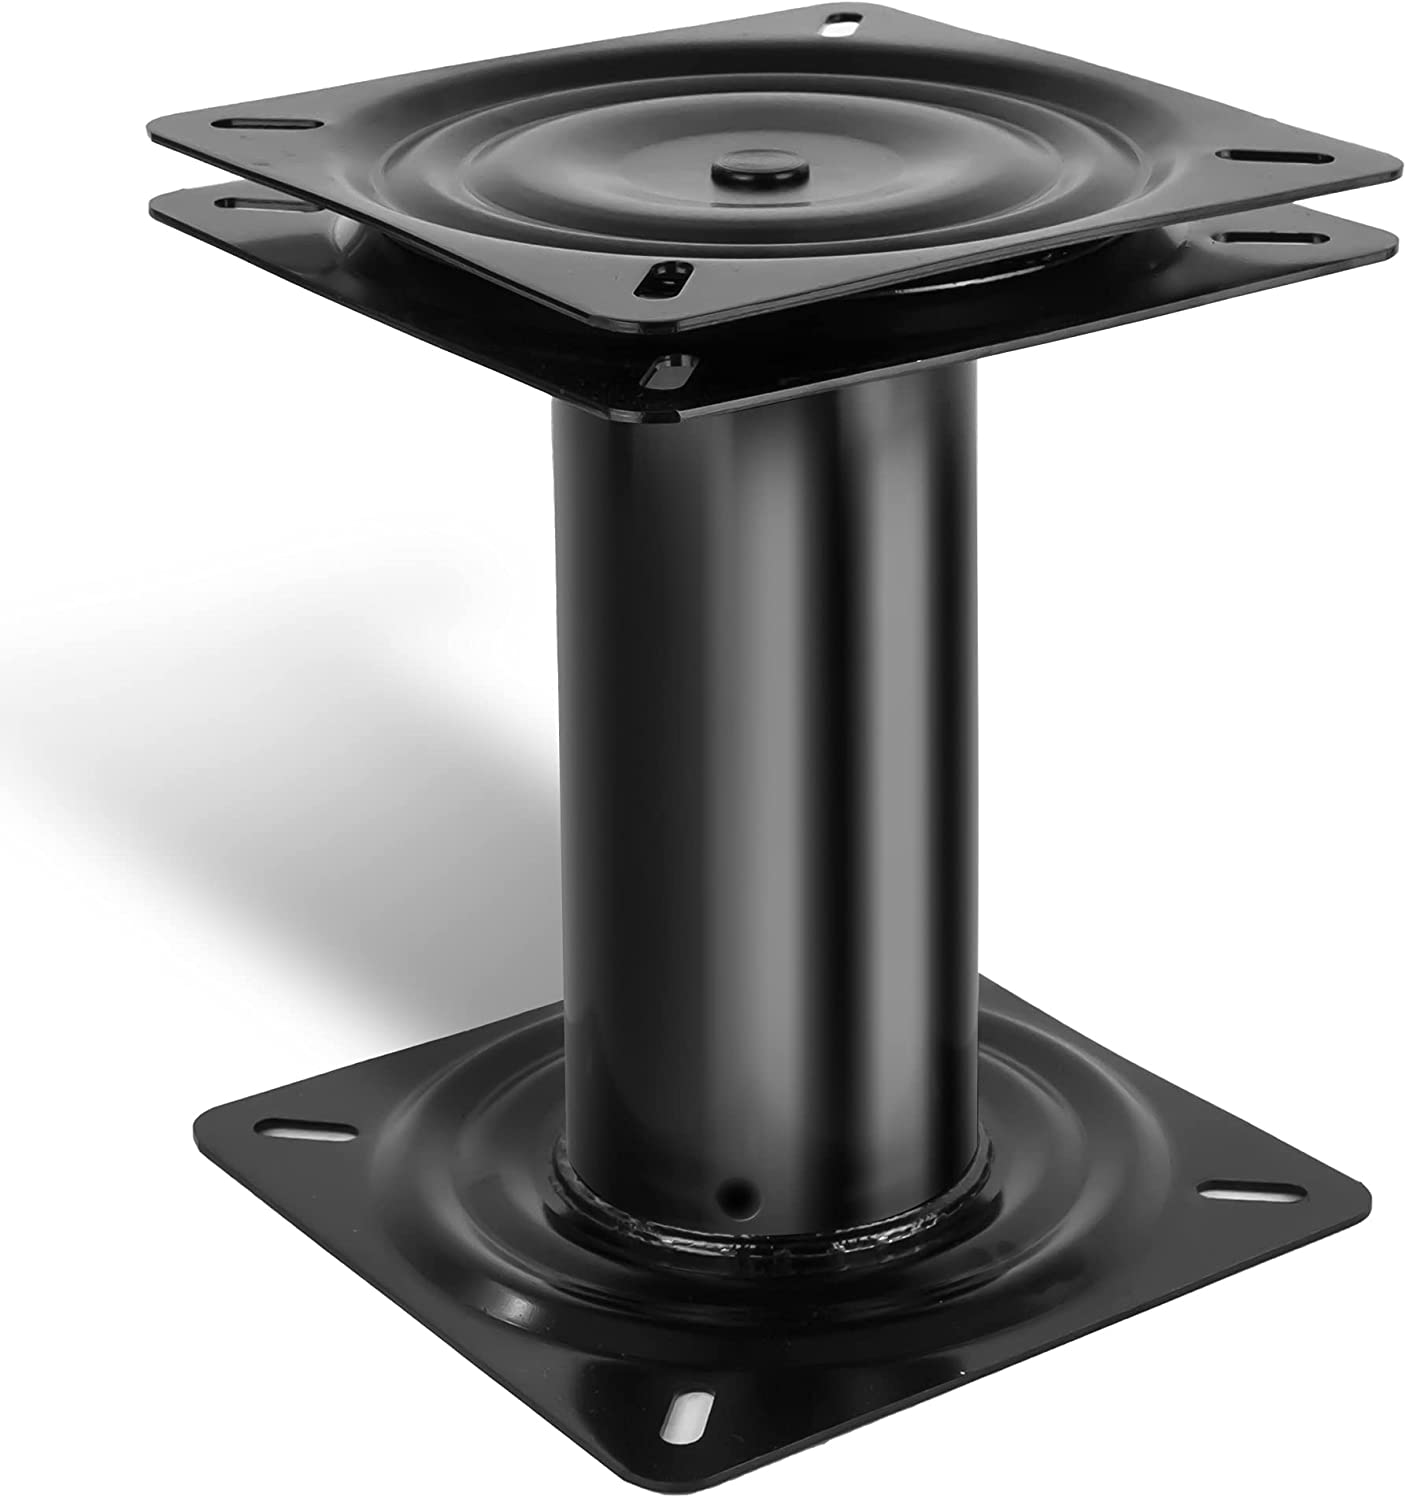 8 in (203mm) Marine Boat Seat Fixed Pedestal with 360 Degree Swivel, EDC  Steel with Black Coating finish, For All Standard Boating Seats